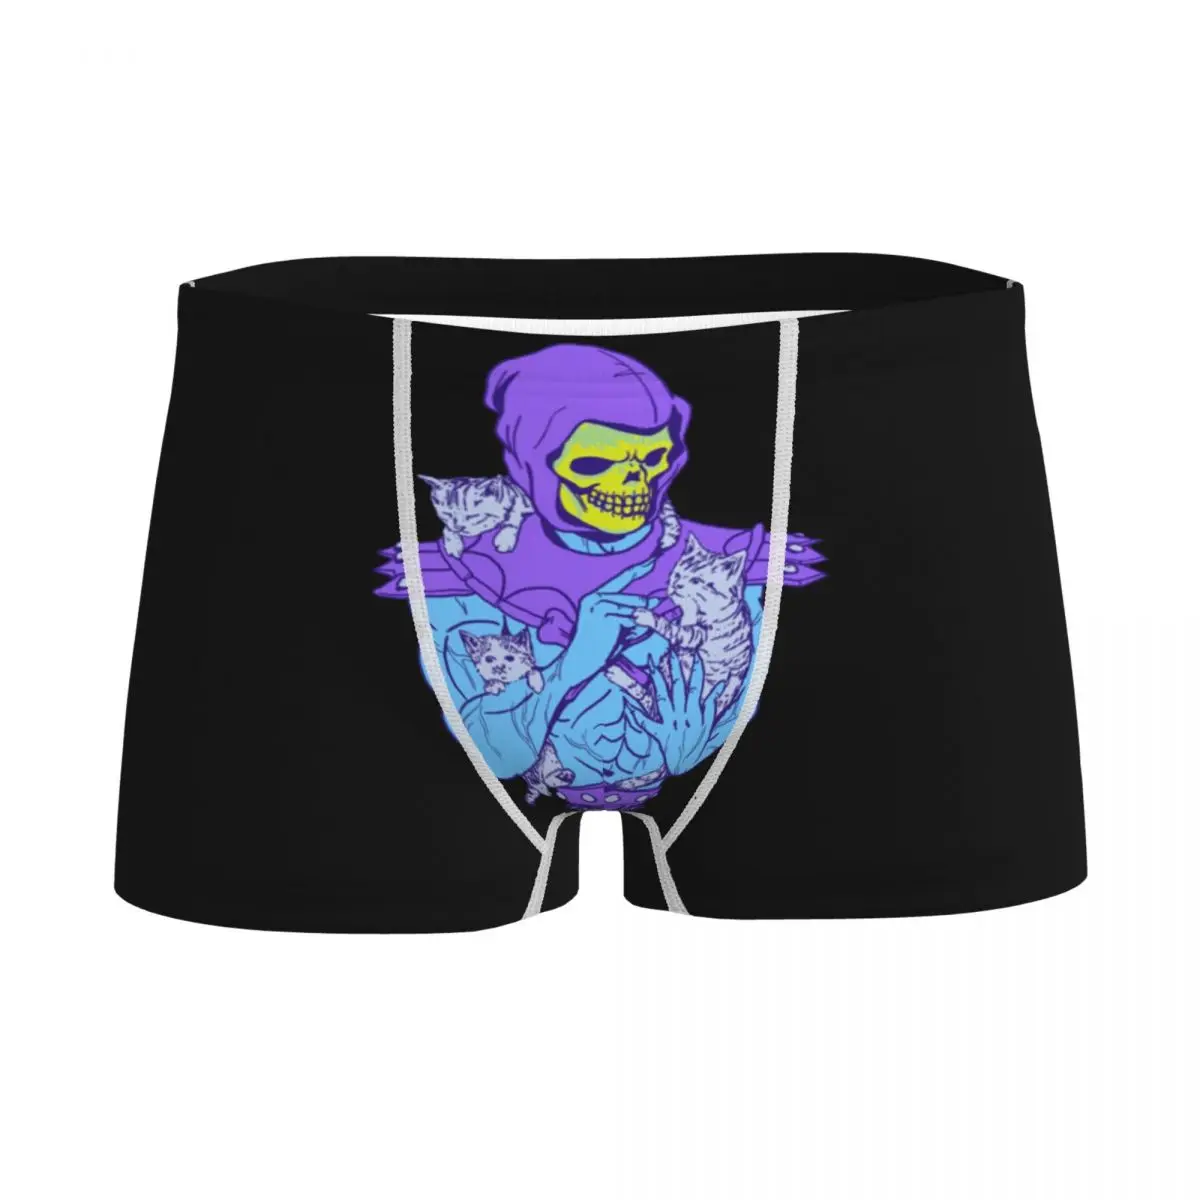 

Boys He-Man And The Masters Of The Universe Boxers Cotton Young Breathable Underwear Man Briefs Harajuku Teenage Underpants